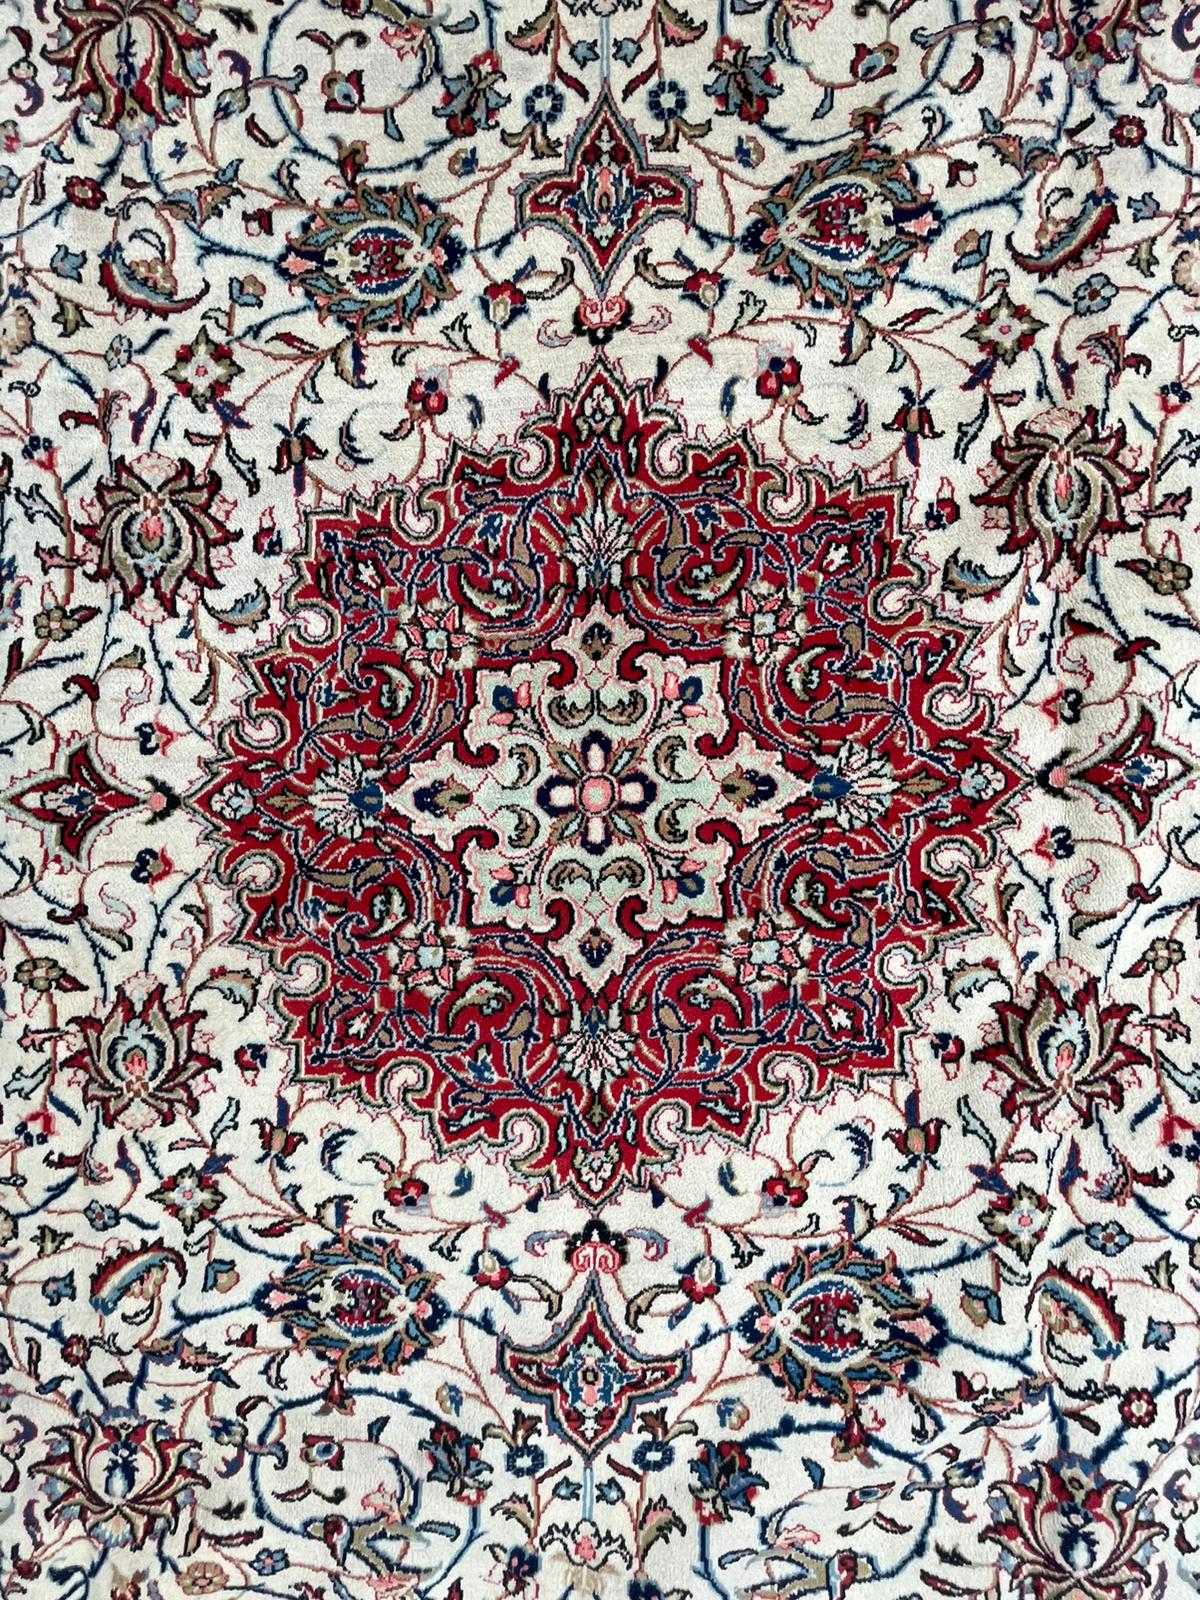 EARLY 20TH CENTURY NORTH WEST PERSIAN SAROUK FLOOR CARPET - Image 2 of 5